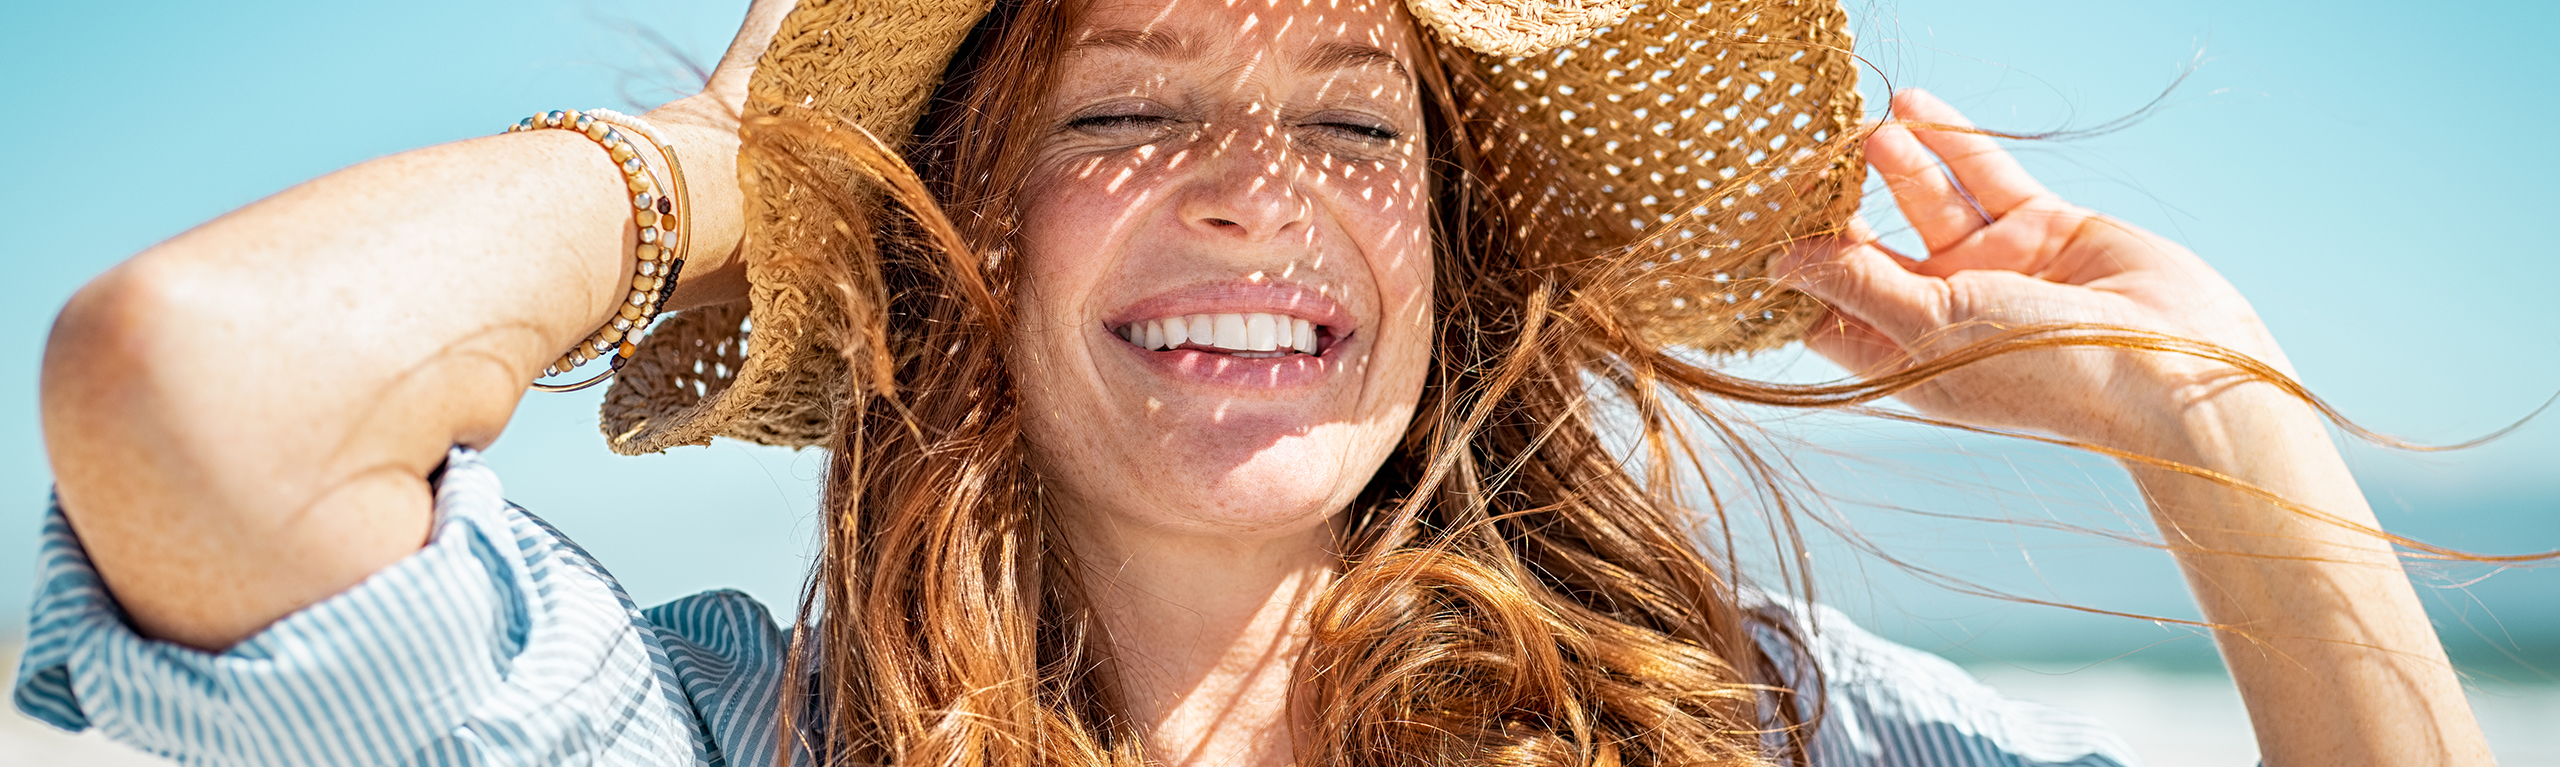 The Mental Health Benefits of Sunlight